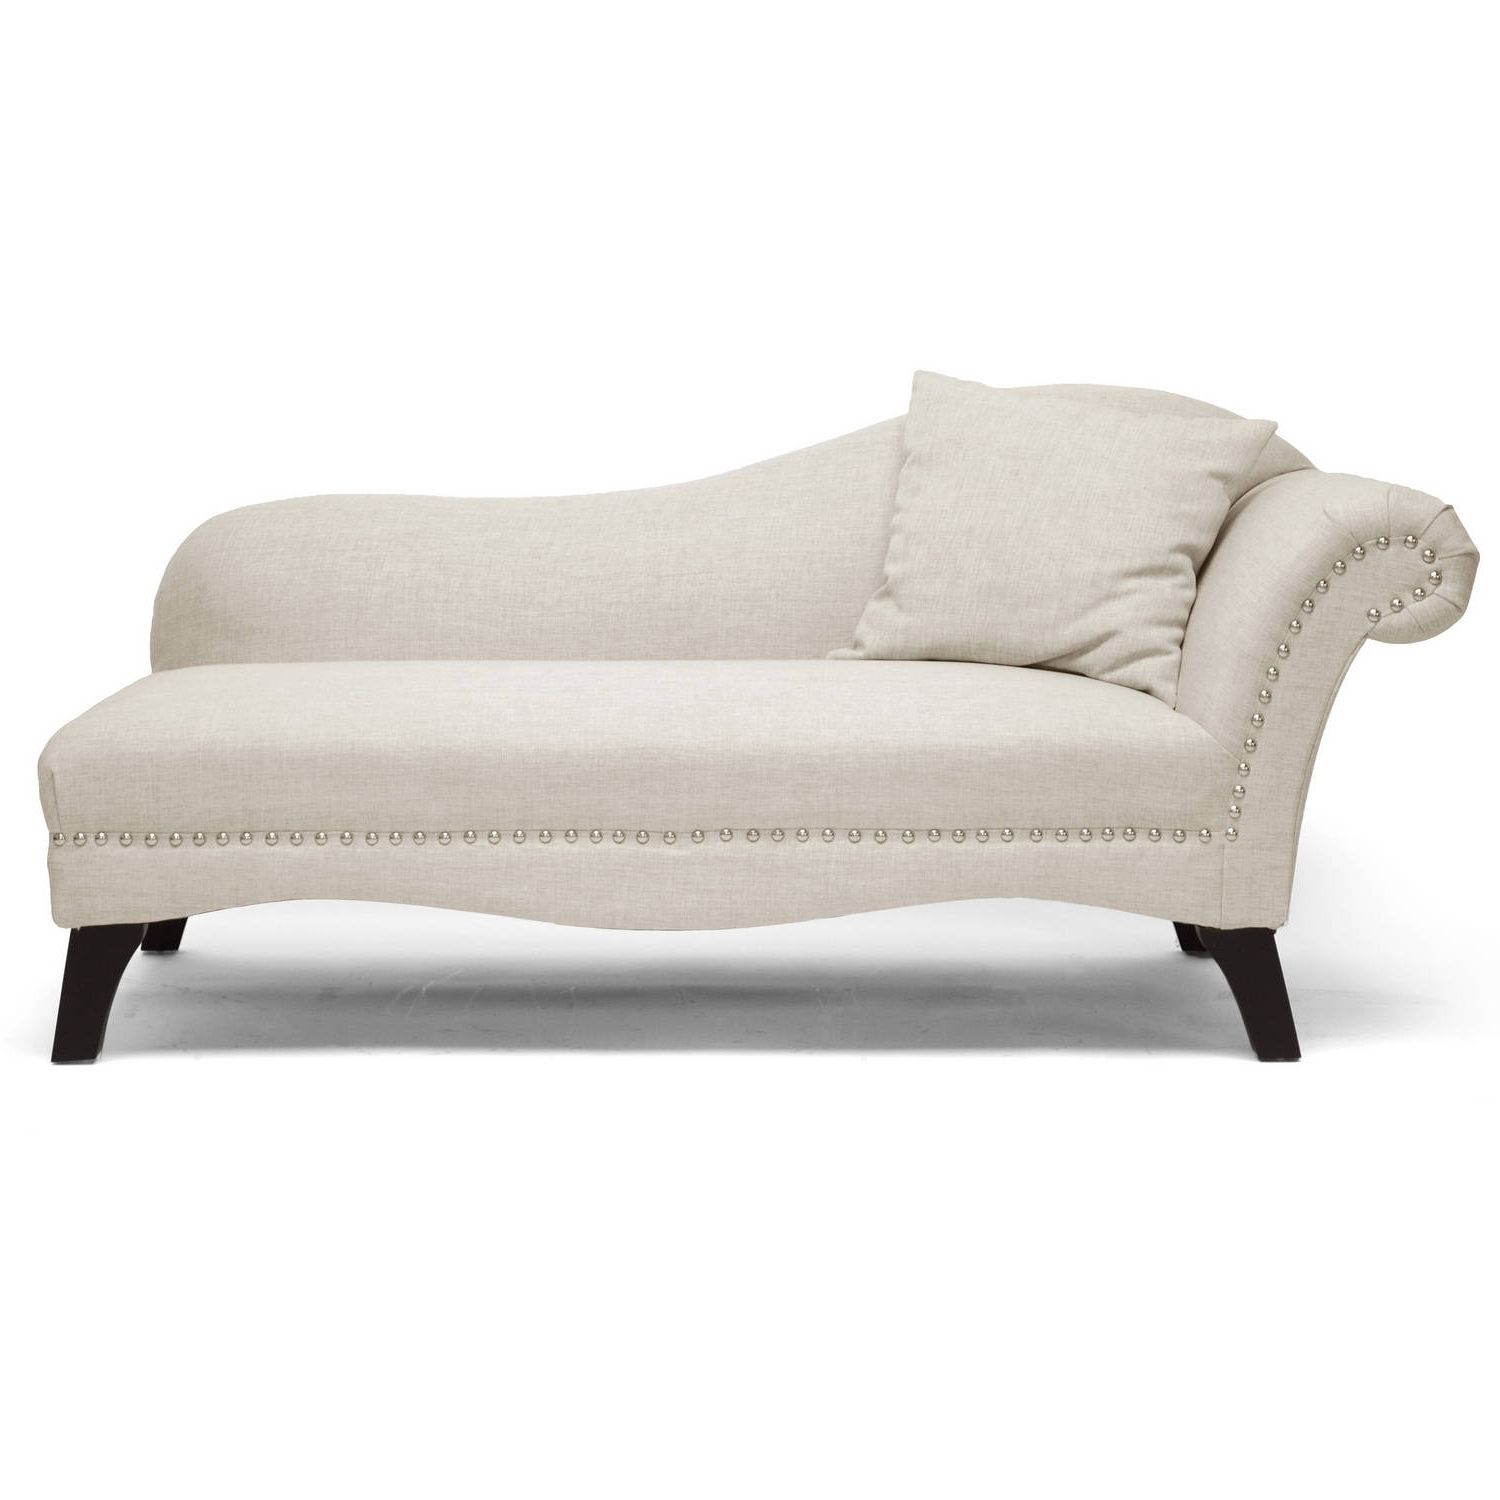 2018 Vintage Indoor Chaise Lounge Chairs Within Chaise Lounges – Walmart (View 11 of 15)